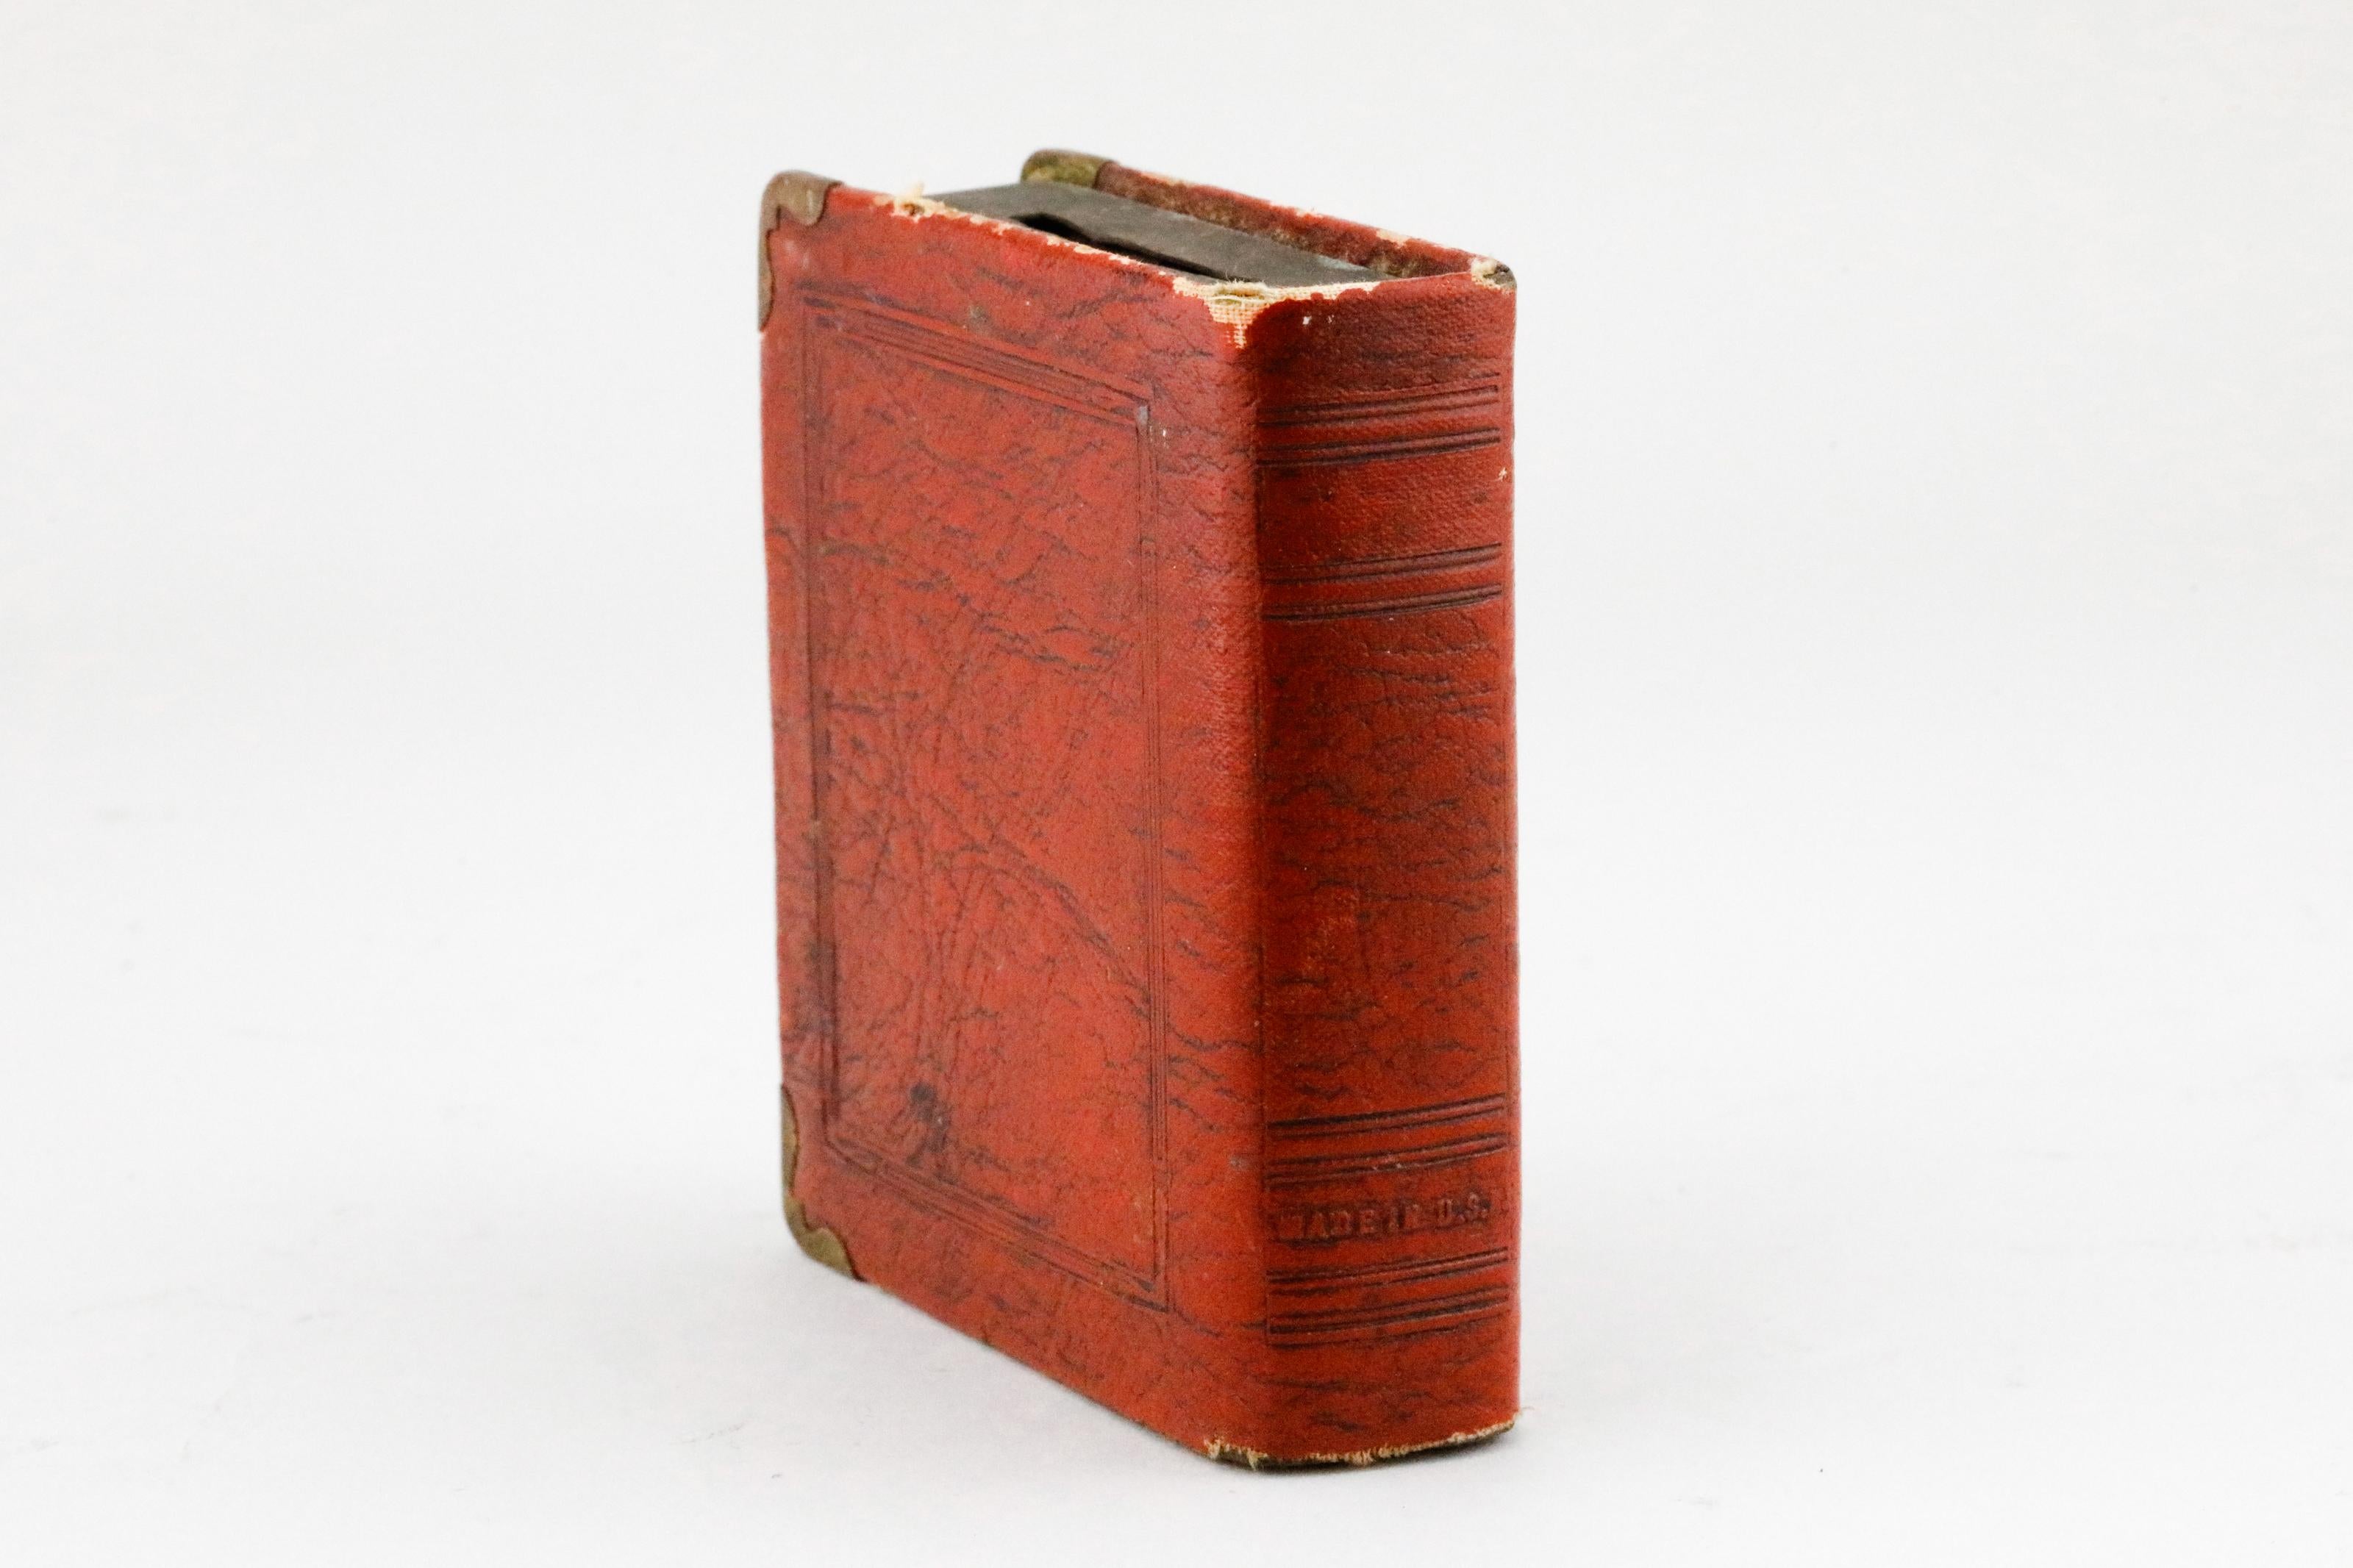 North American Mid-20th Century American Book-Form Charity Box